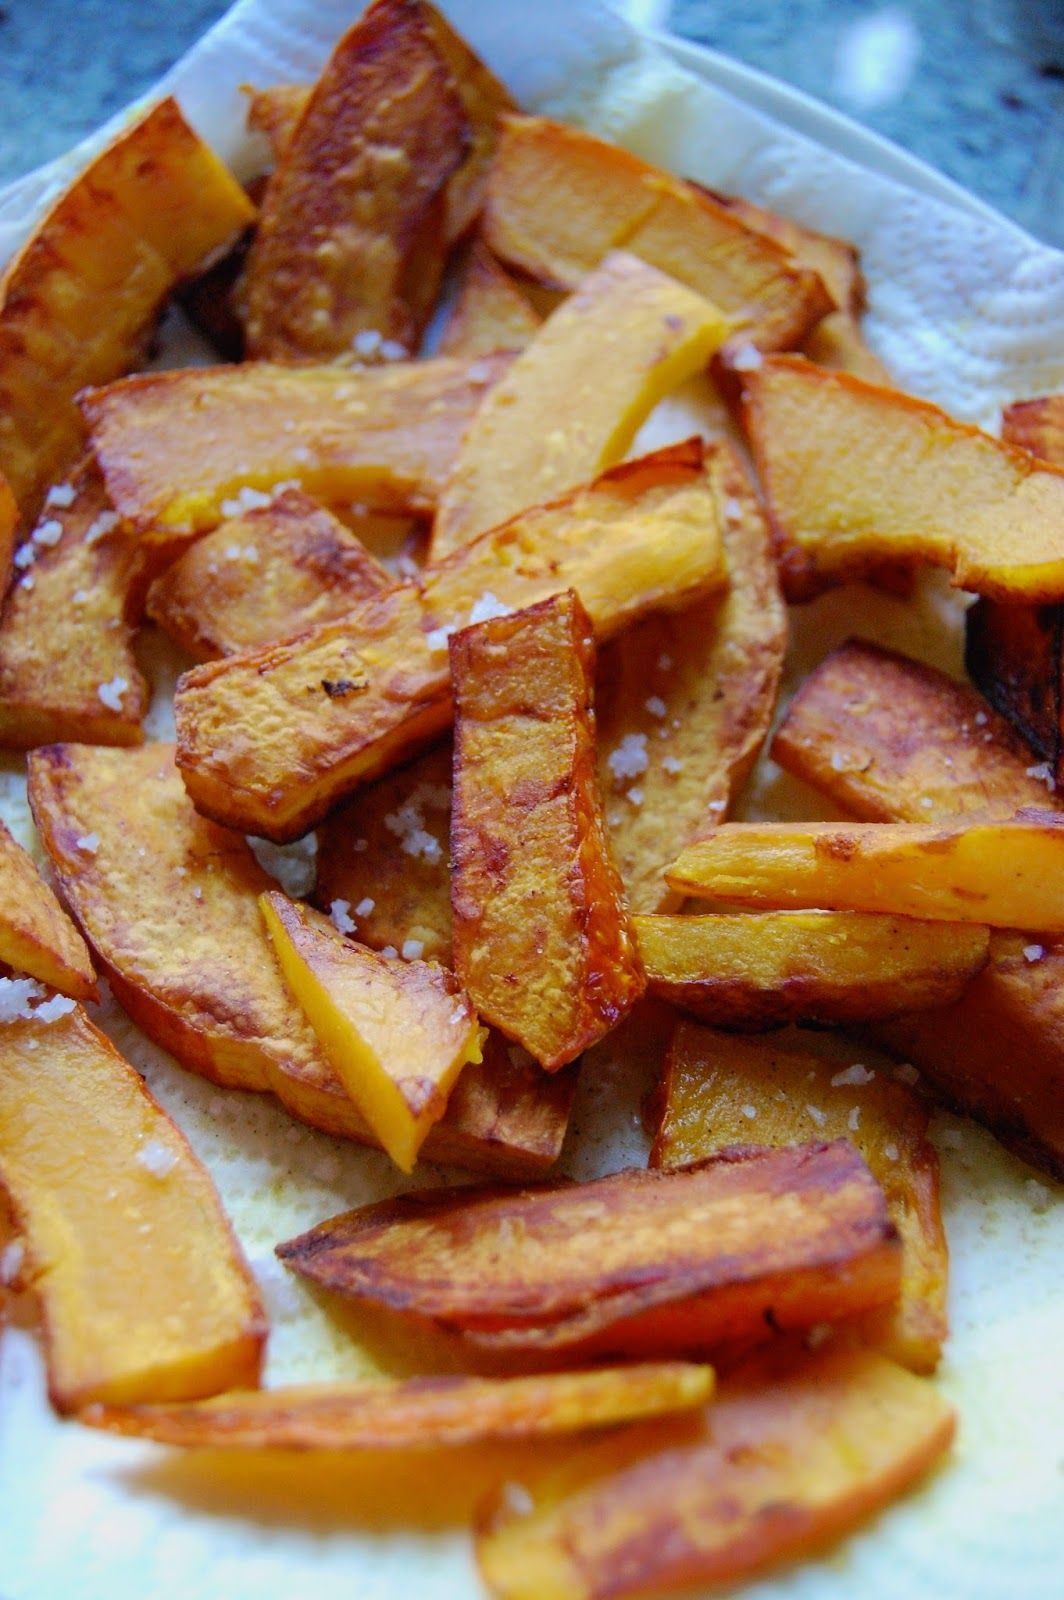 Parts de plaisir: Red kuri squash fries :: instead of pan frying, could try baking, after tossing in coconut oil & sprinkling w/ cumin & salt -   24 red kuri squash recipes
 ideas